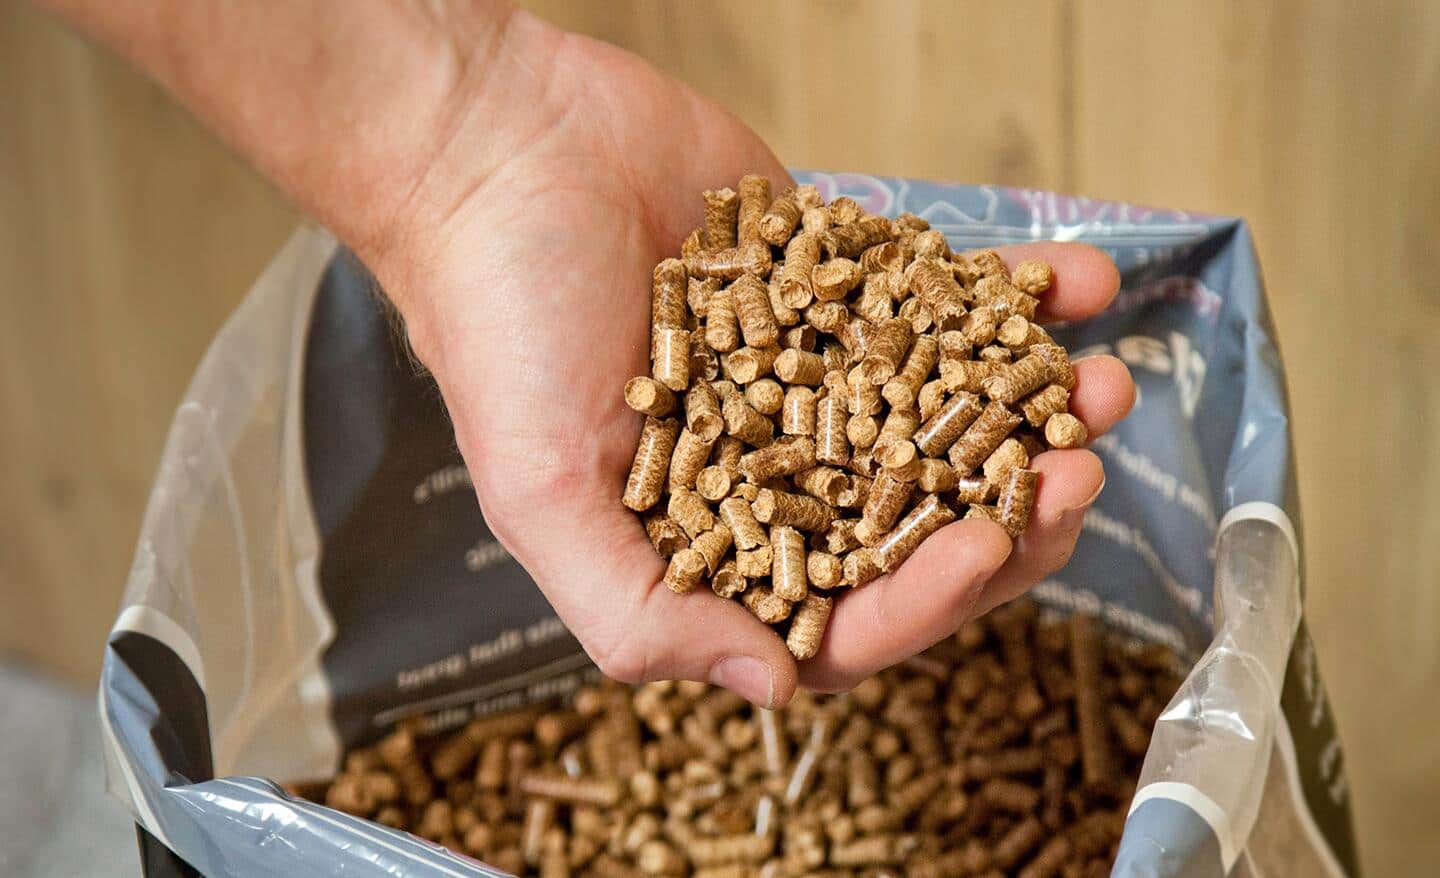 A person holding wood pellets that serve as fuel for a pellet grill.